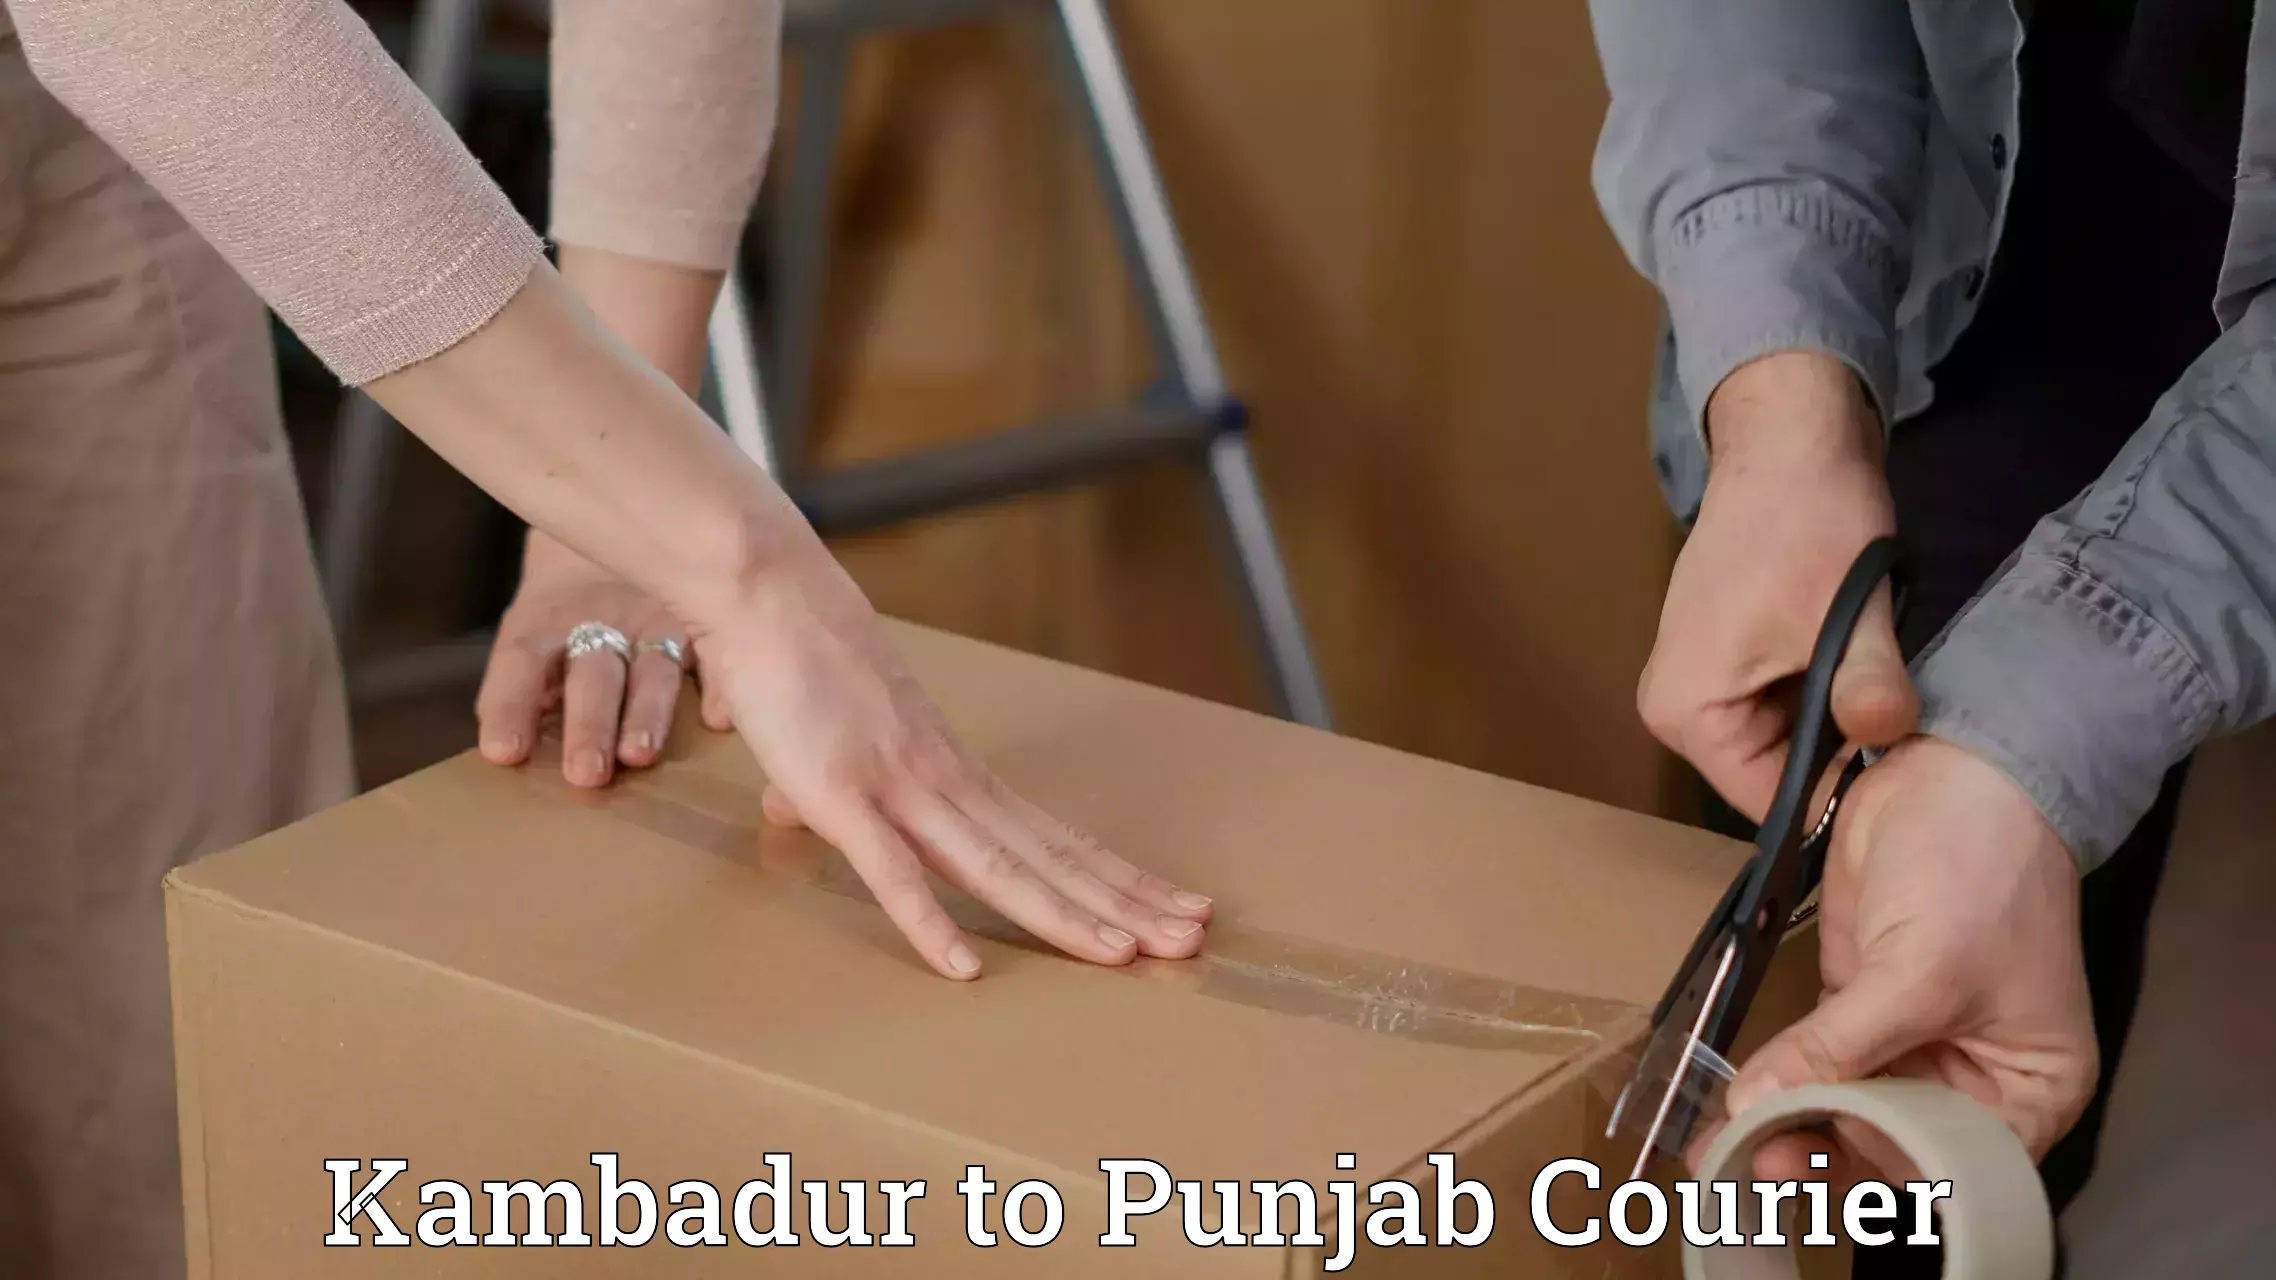 On-call courier service Kambadur to Ropar